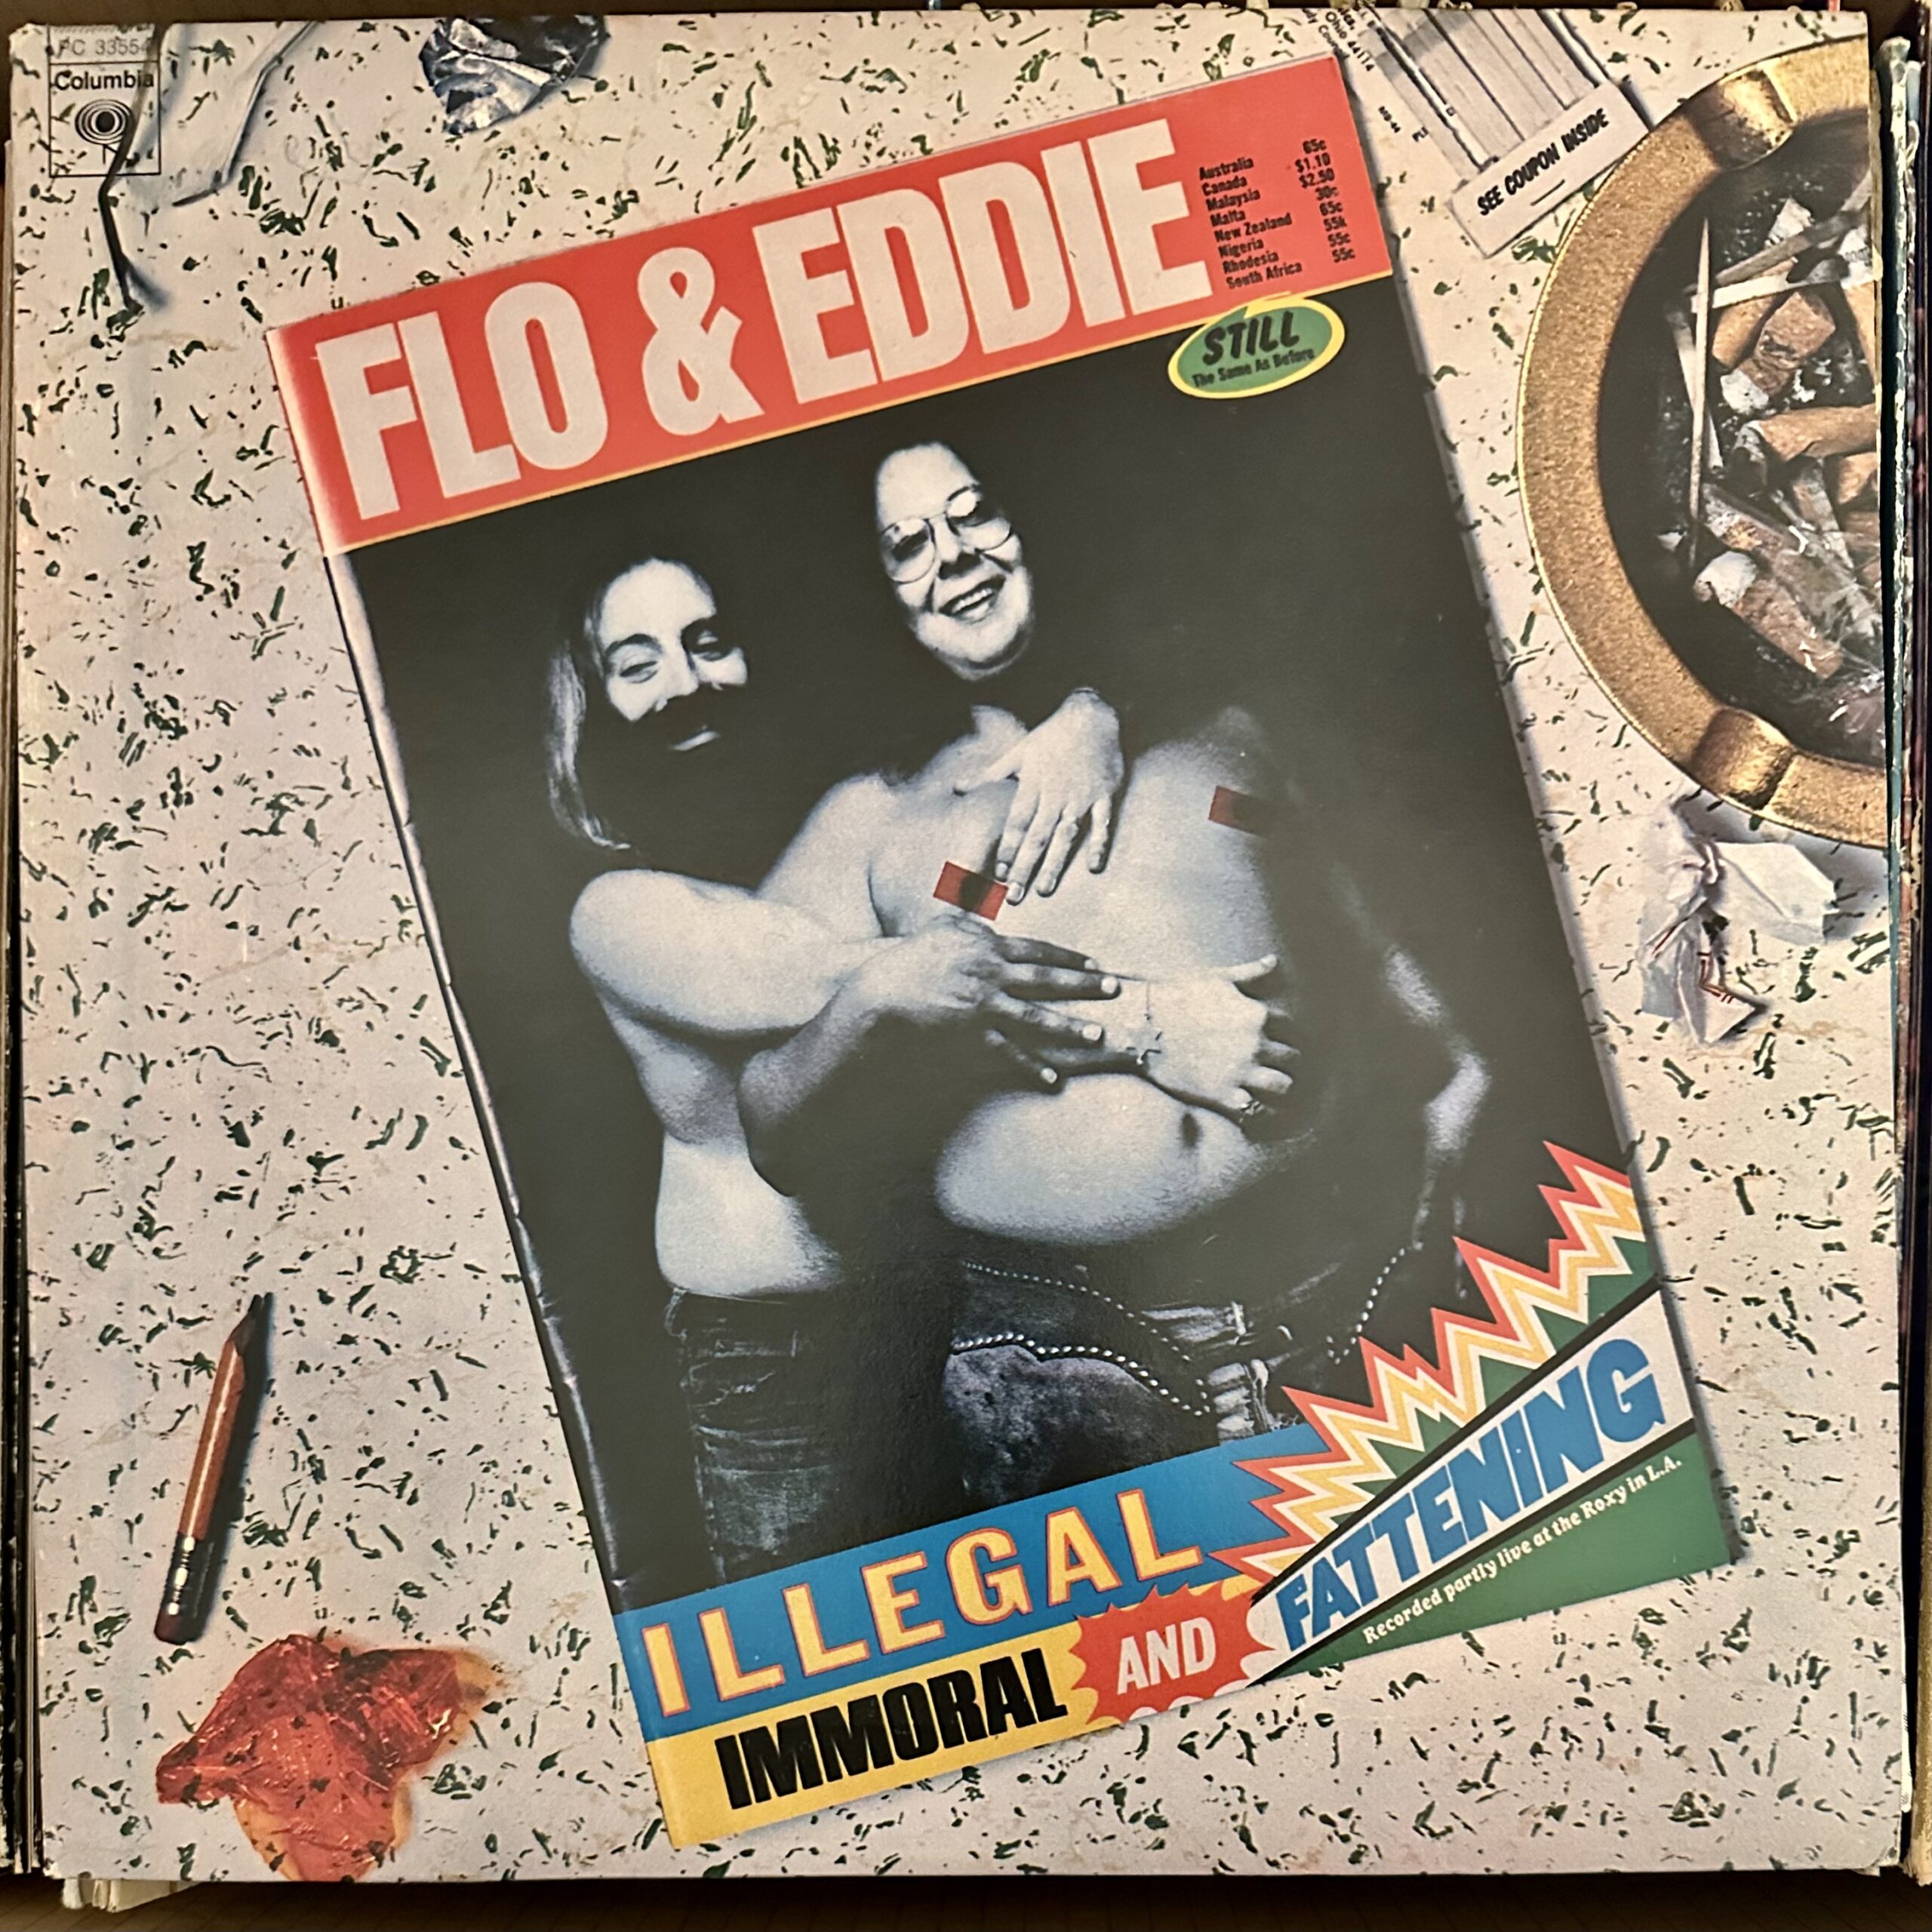 Illegal, Immoral and Fattening by Flo & Eddie